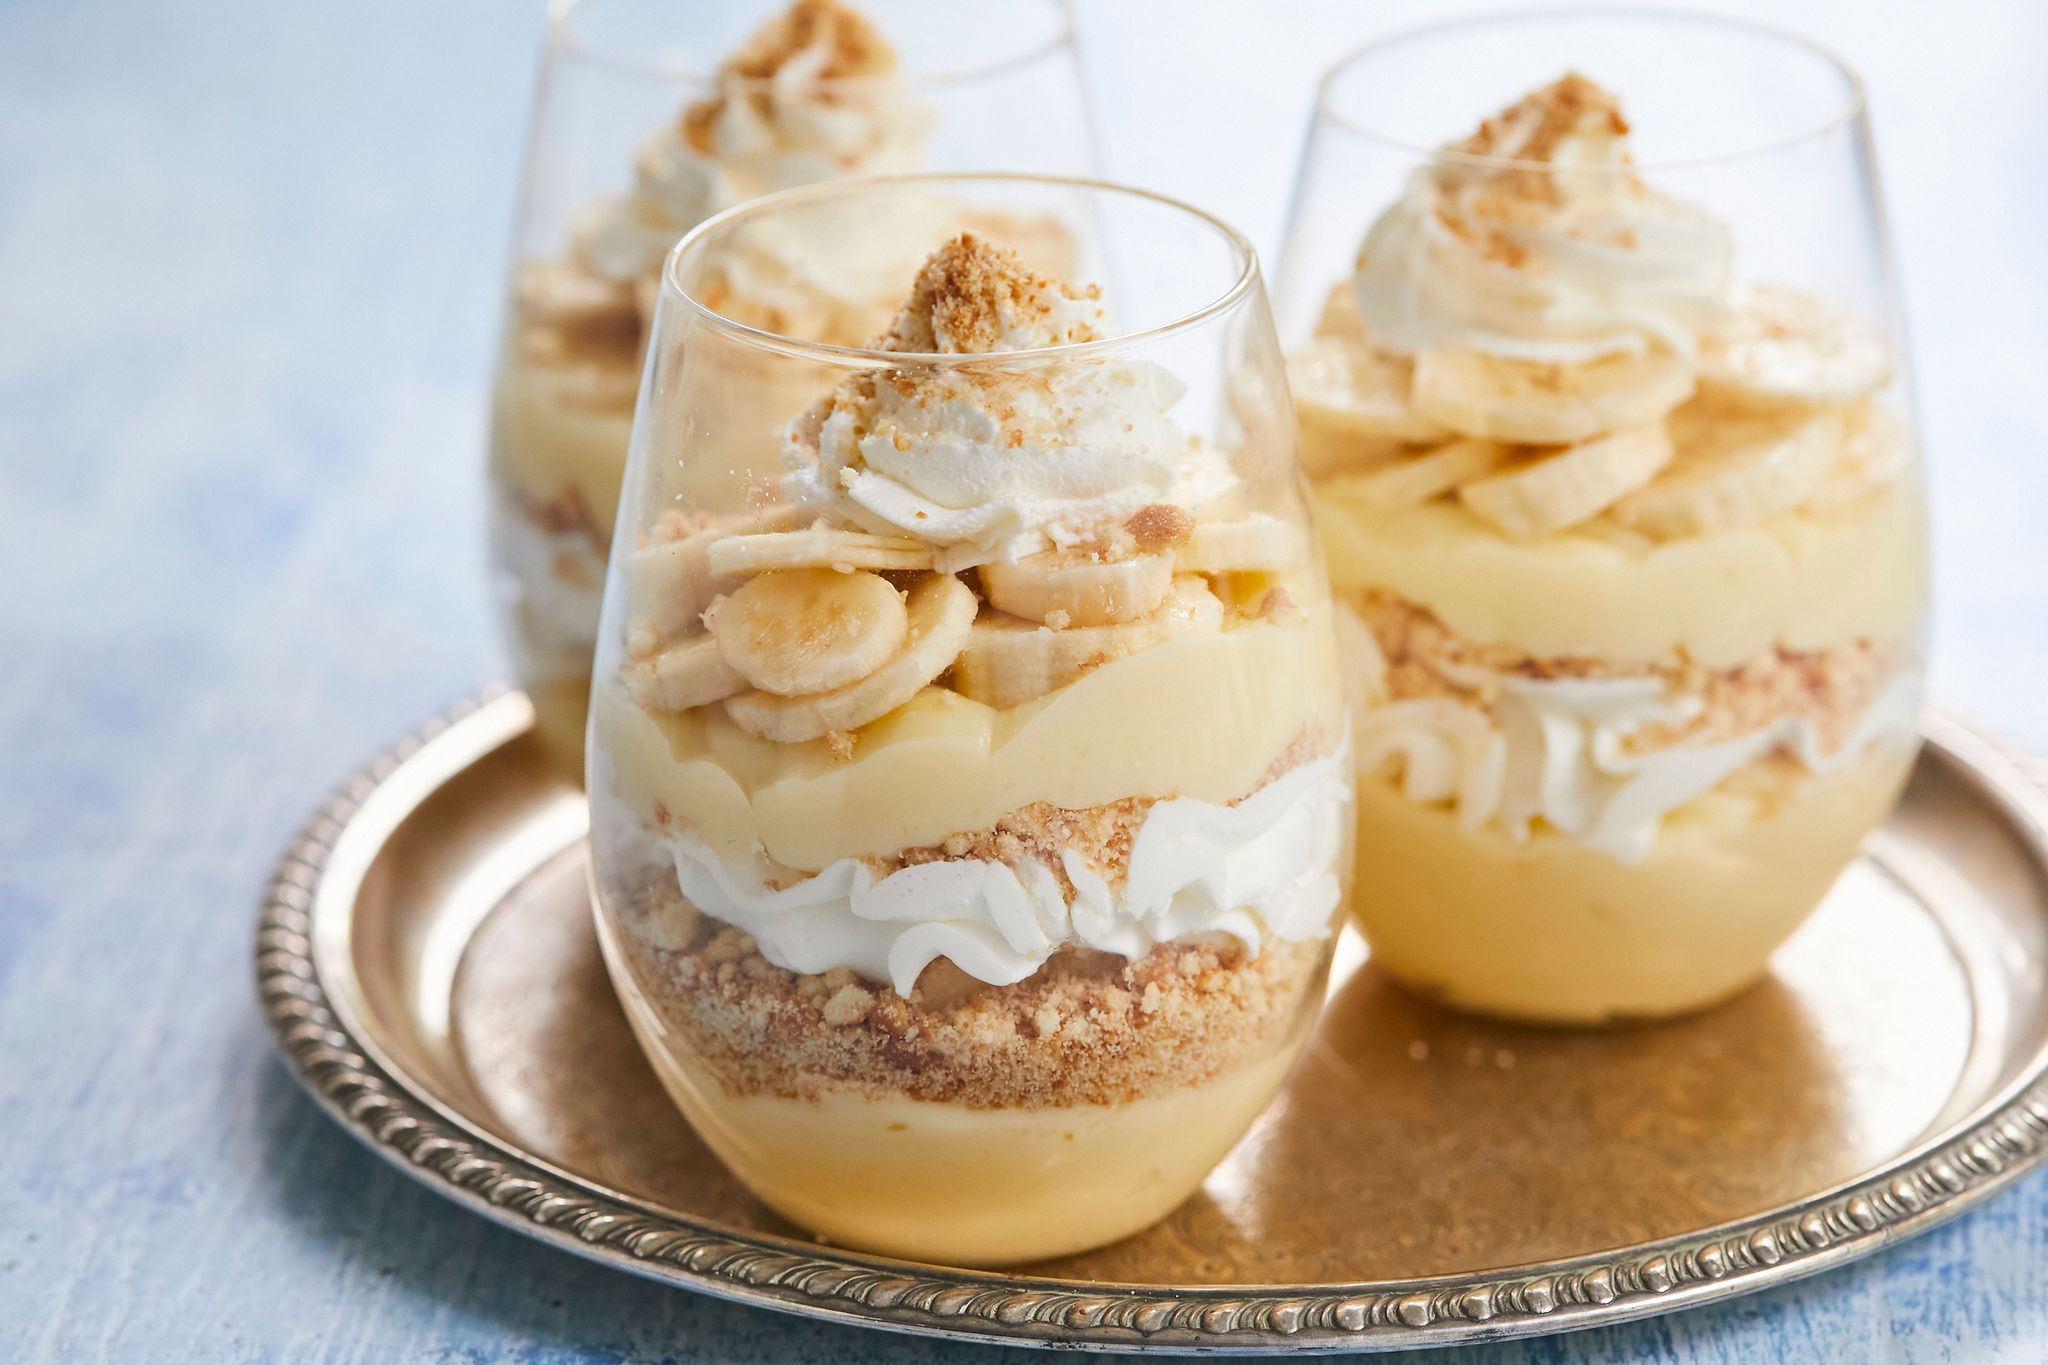 All the layers of my Homemade Banana Pudding recipe.